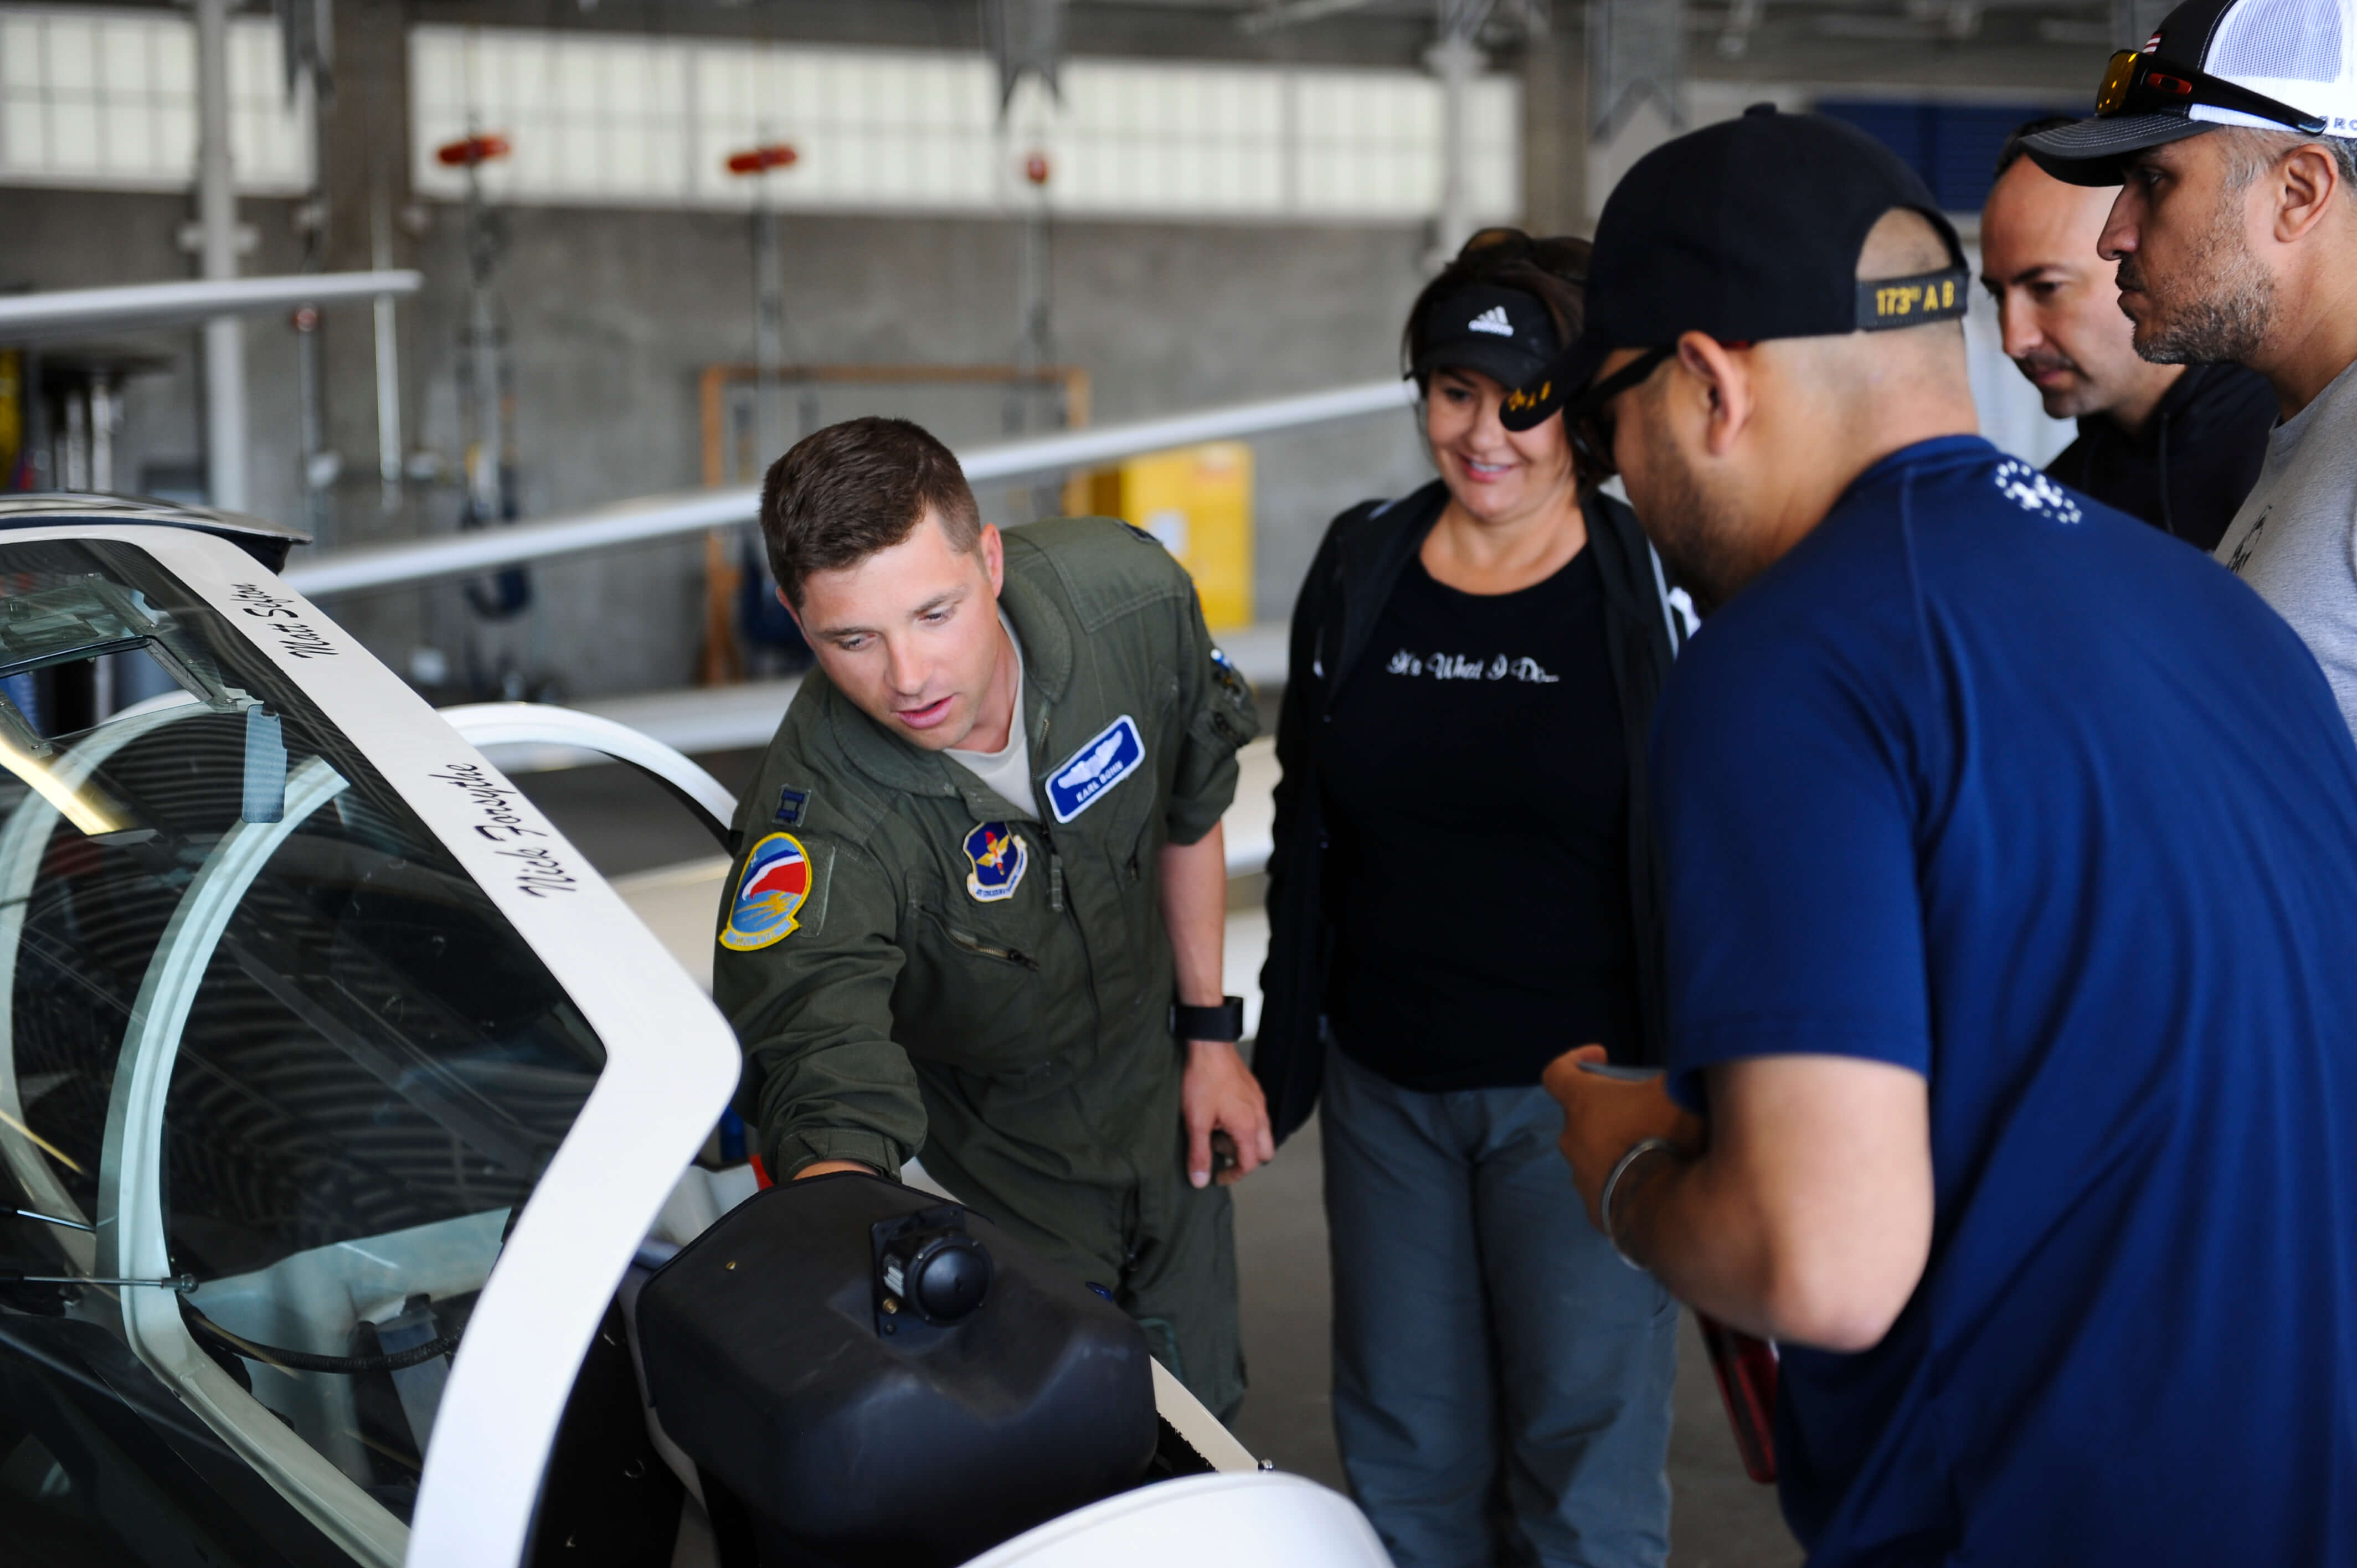 wounded warrior veterans examine a glider